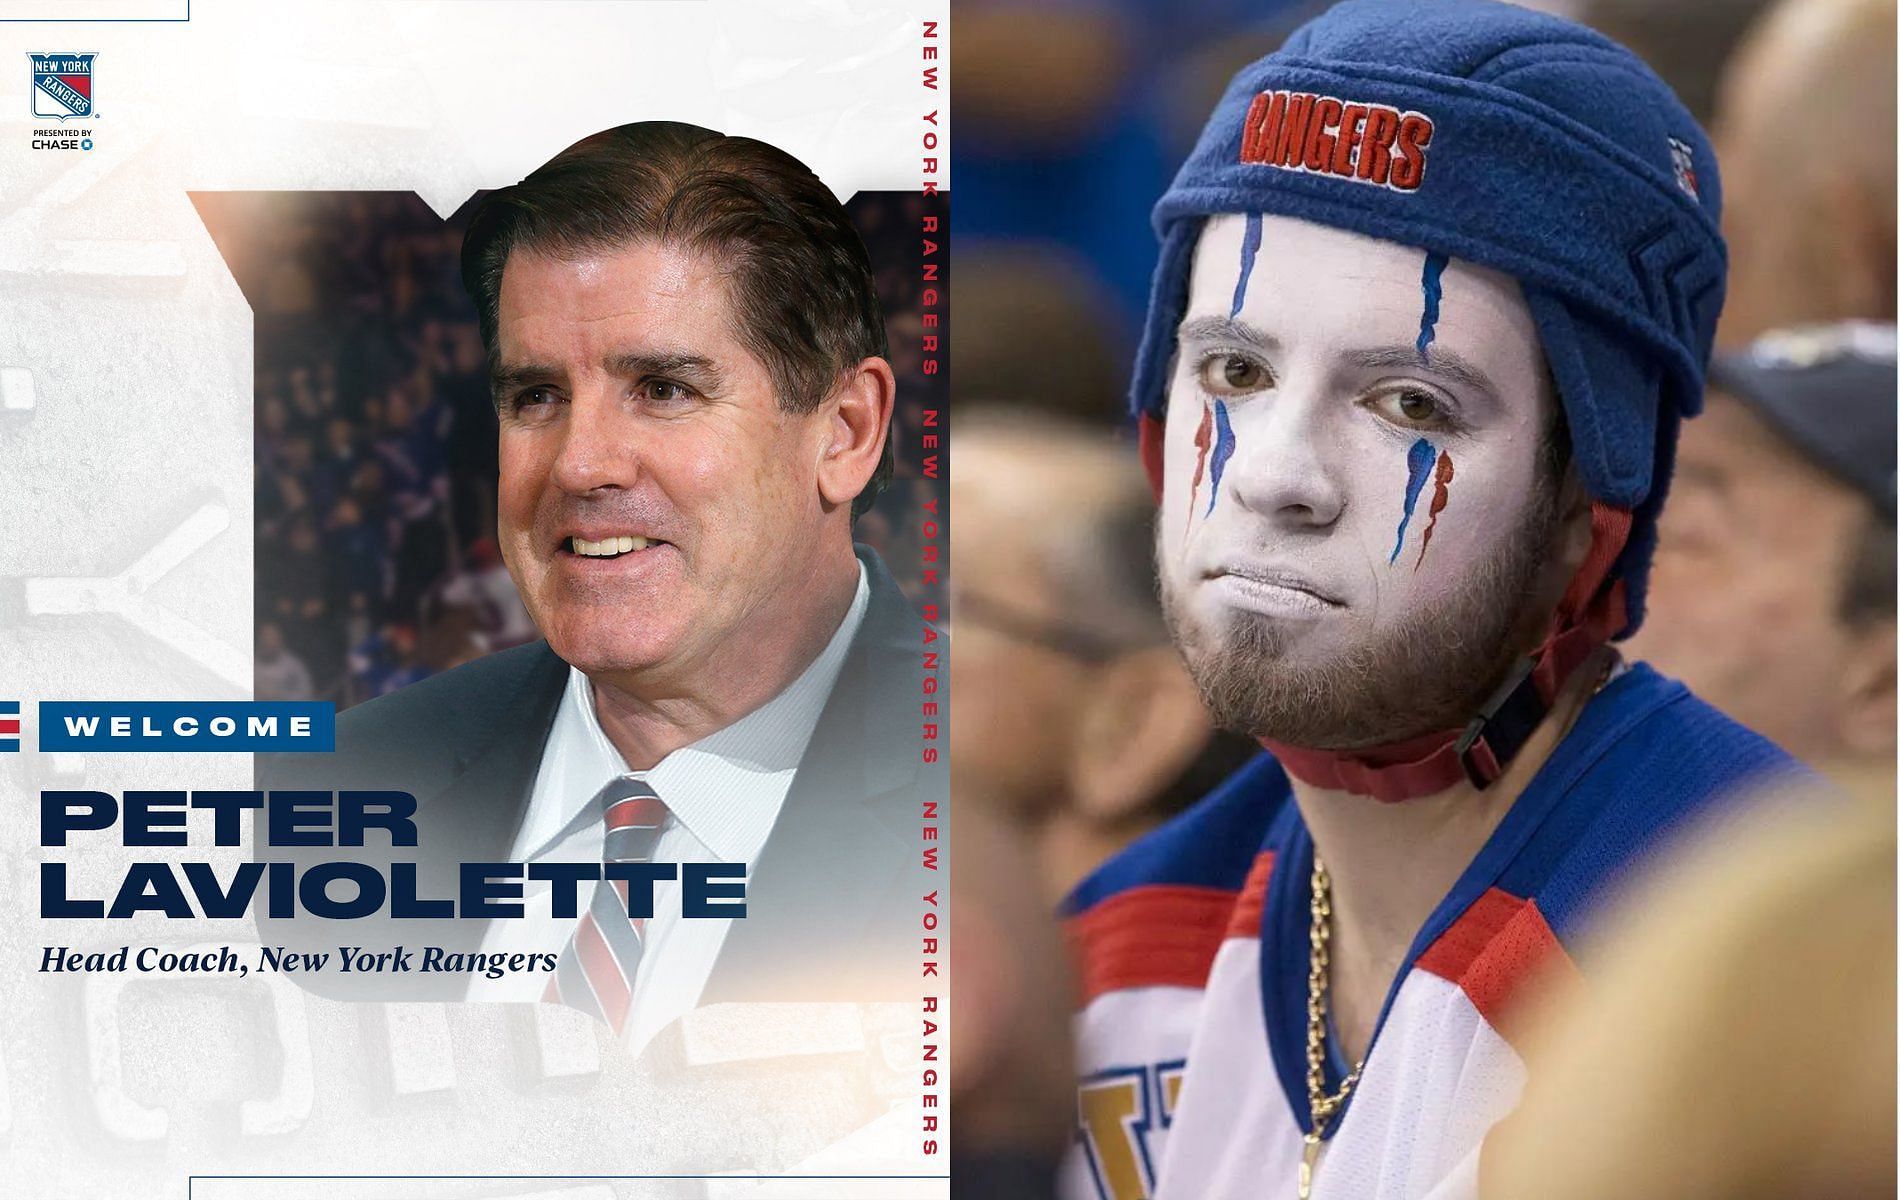 New York Rangers fans dejected after Peter Laviolette is hired as new head coach